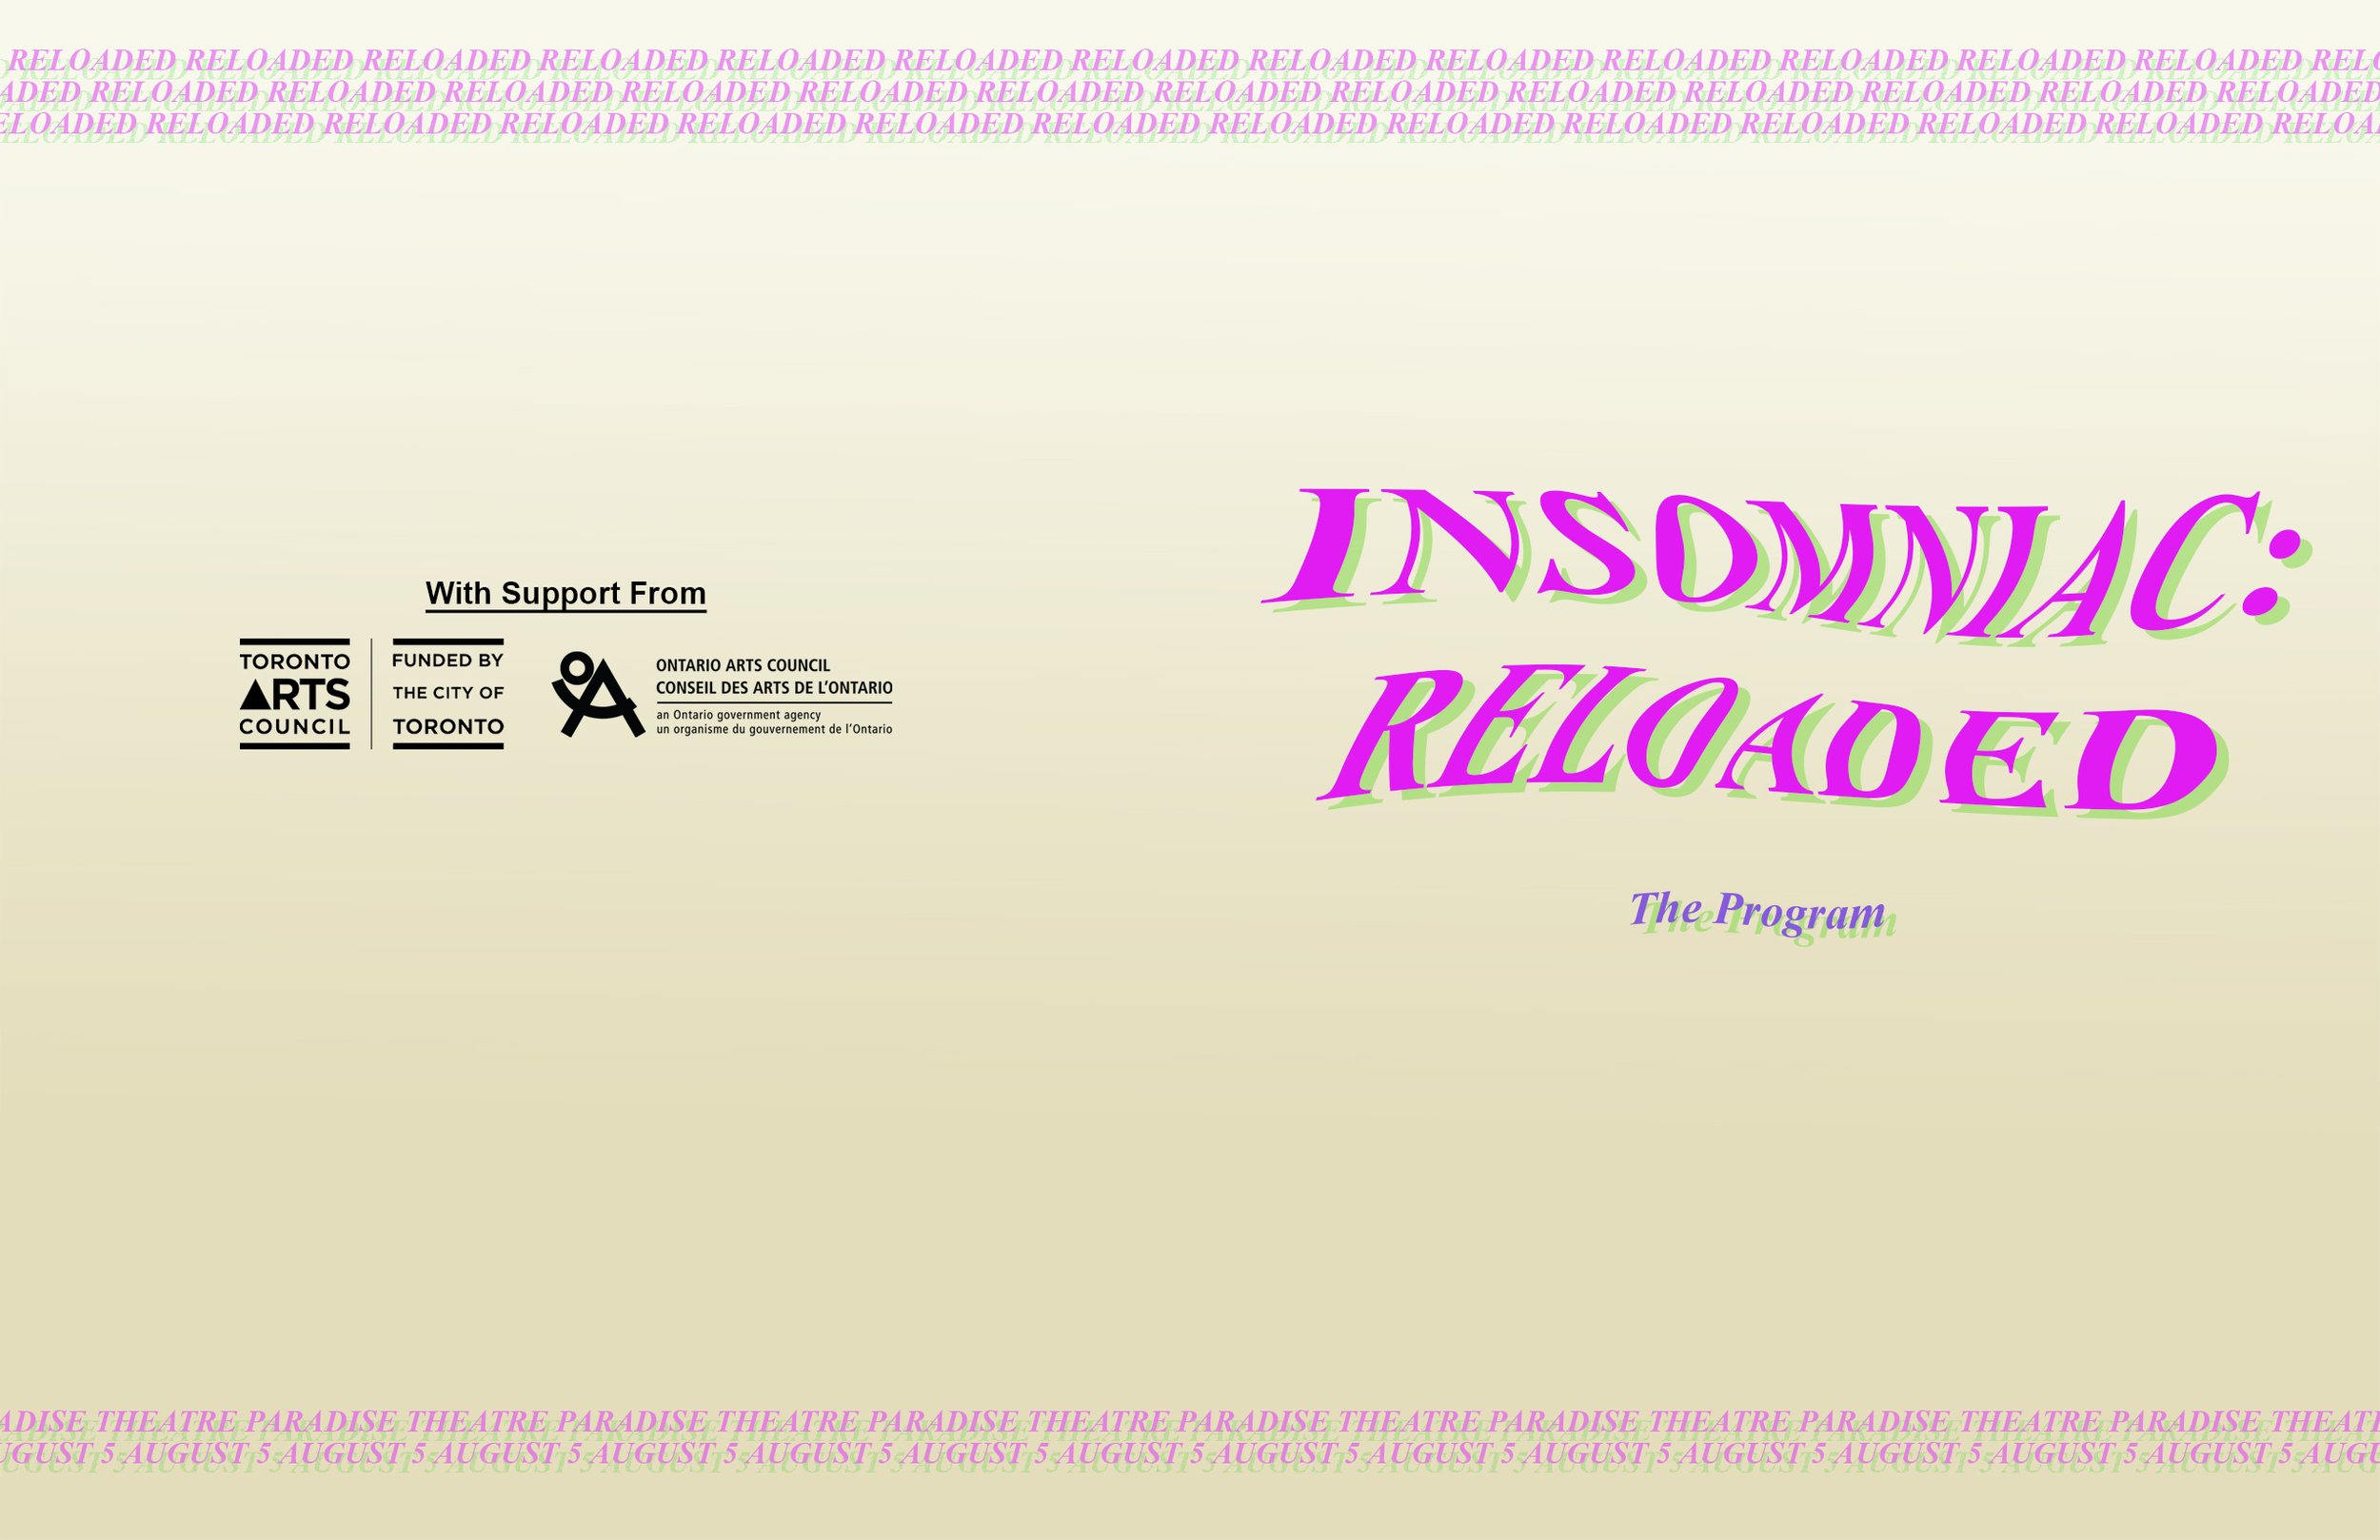 Program Reloaded - Front and Back Covers.jpg